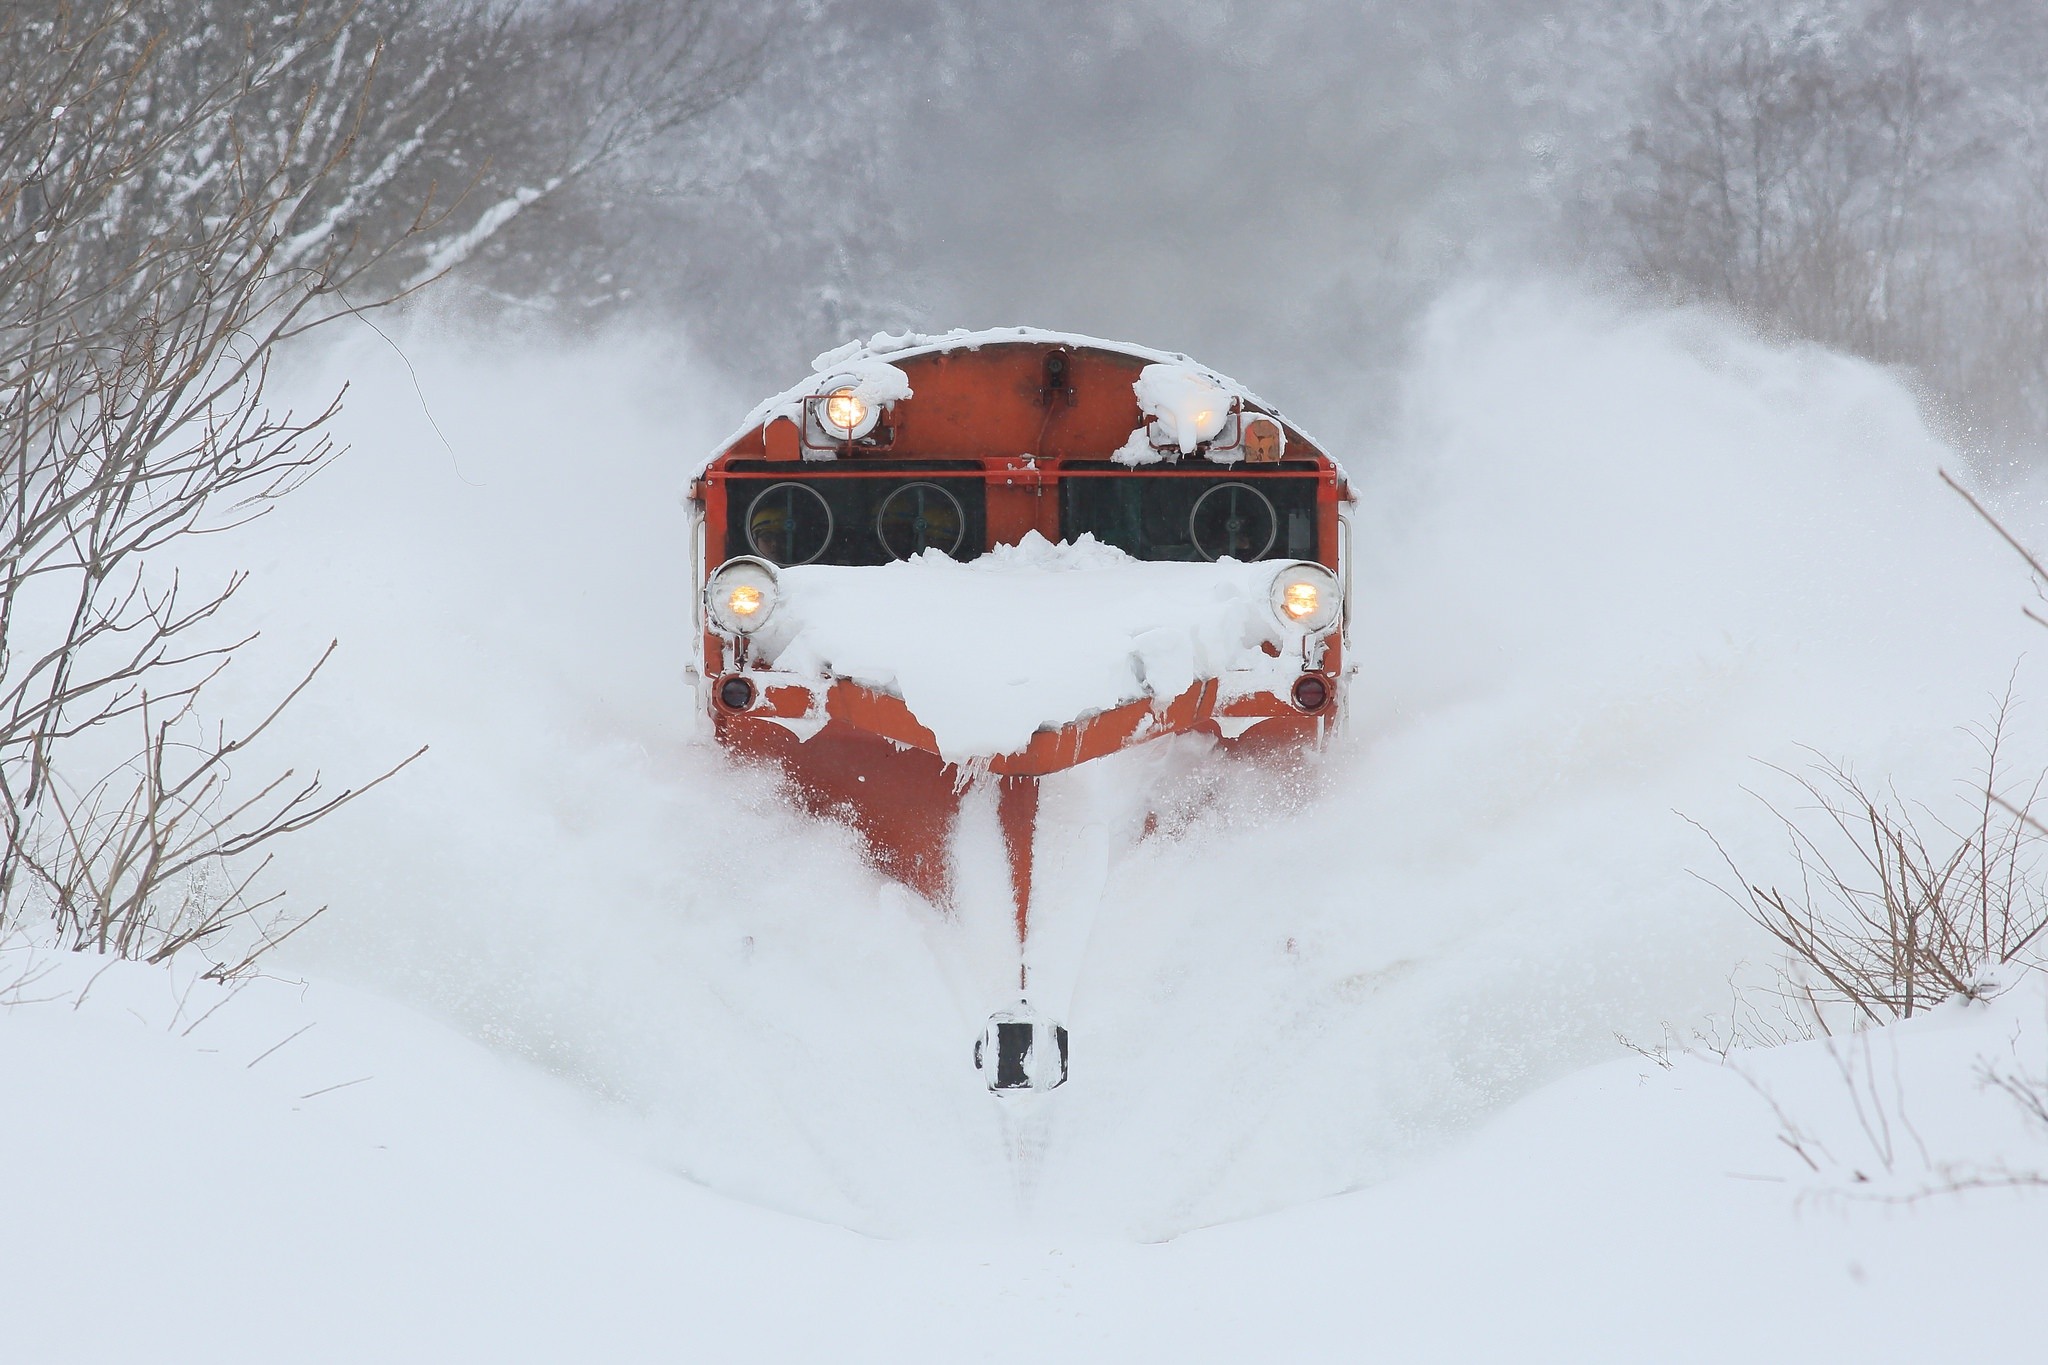 General 2048x1365 train winter snow ice vehicle snowplow frontal view